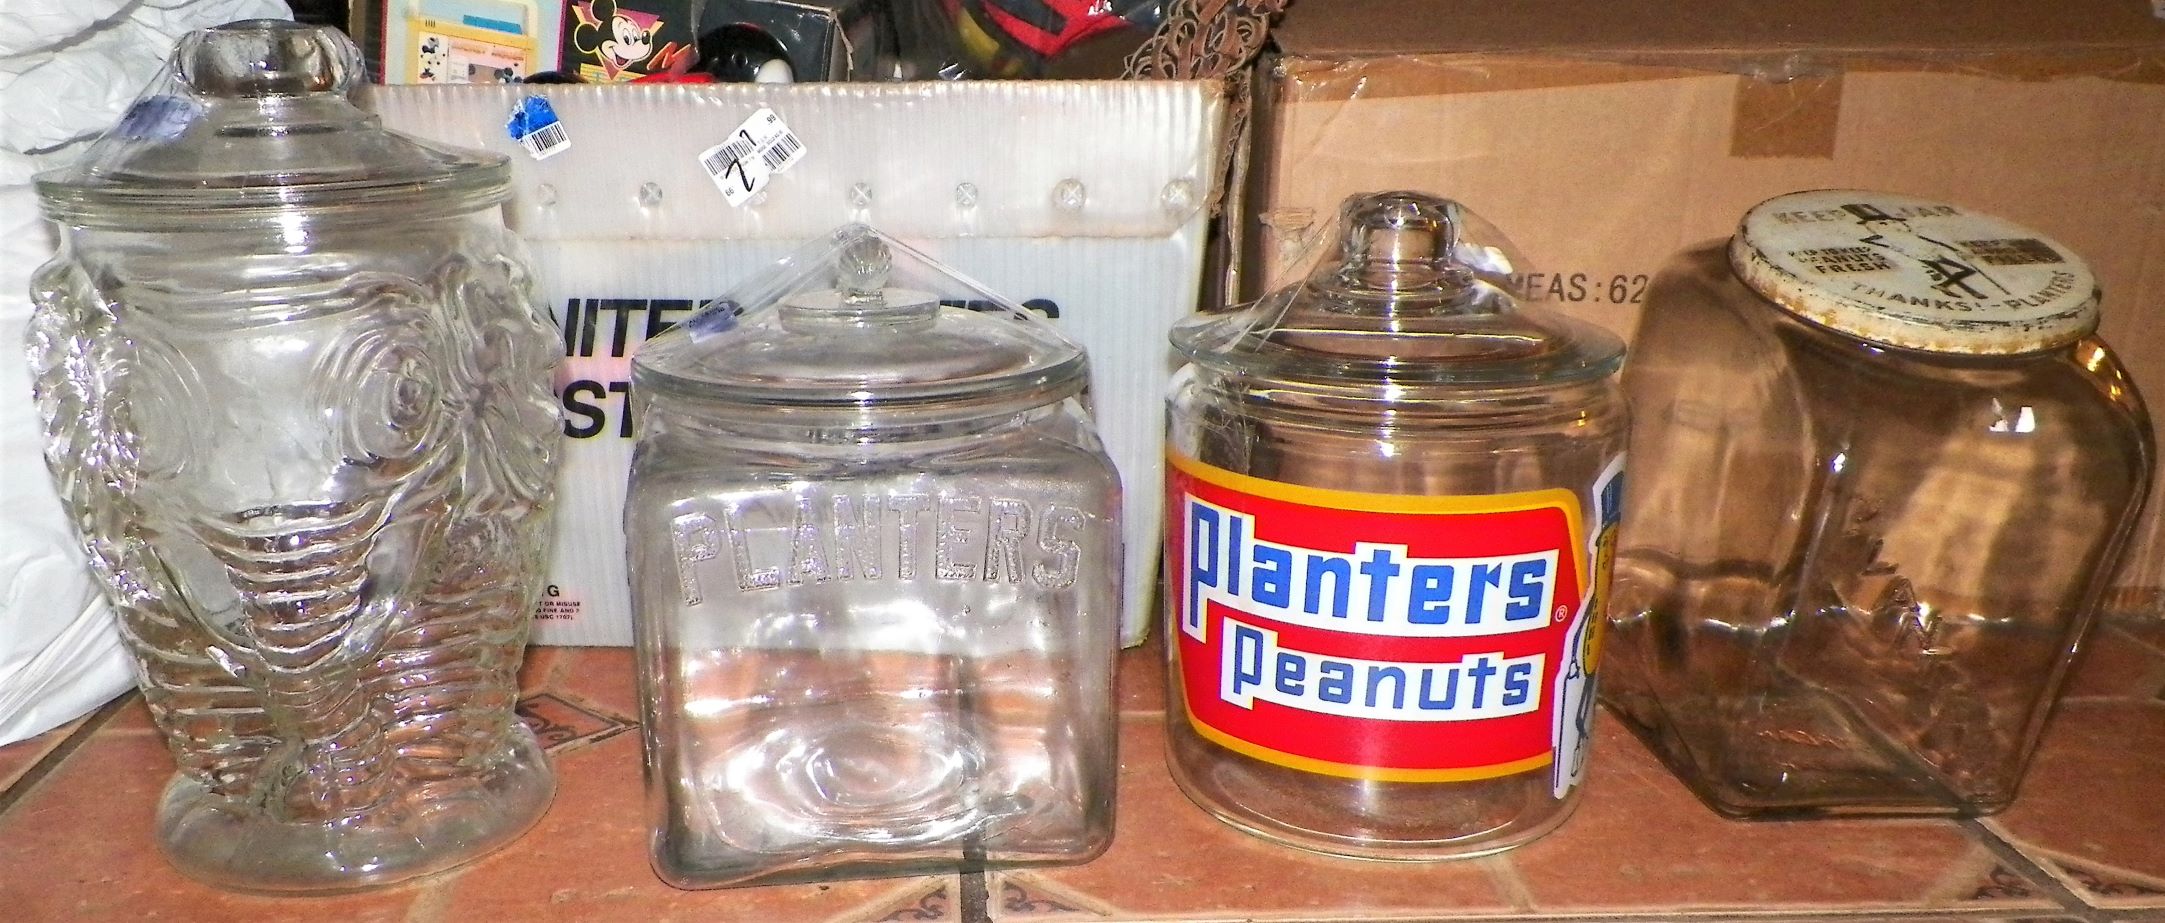 COLLECTIBLE PLANTERS PEANUTS JAR A GROUP 1AAZZ.JPG